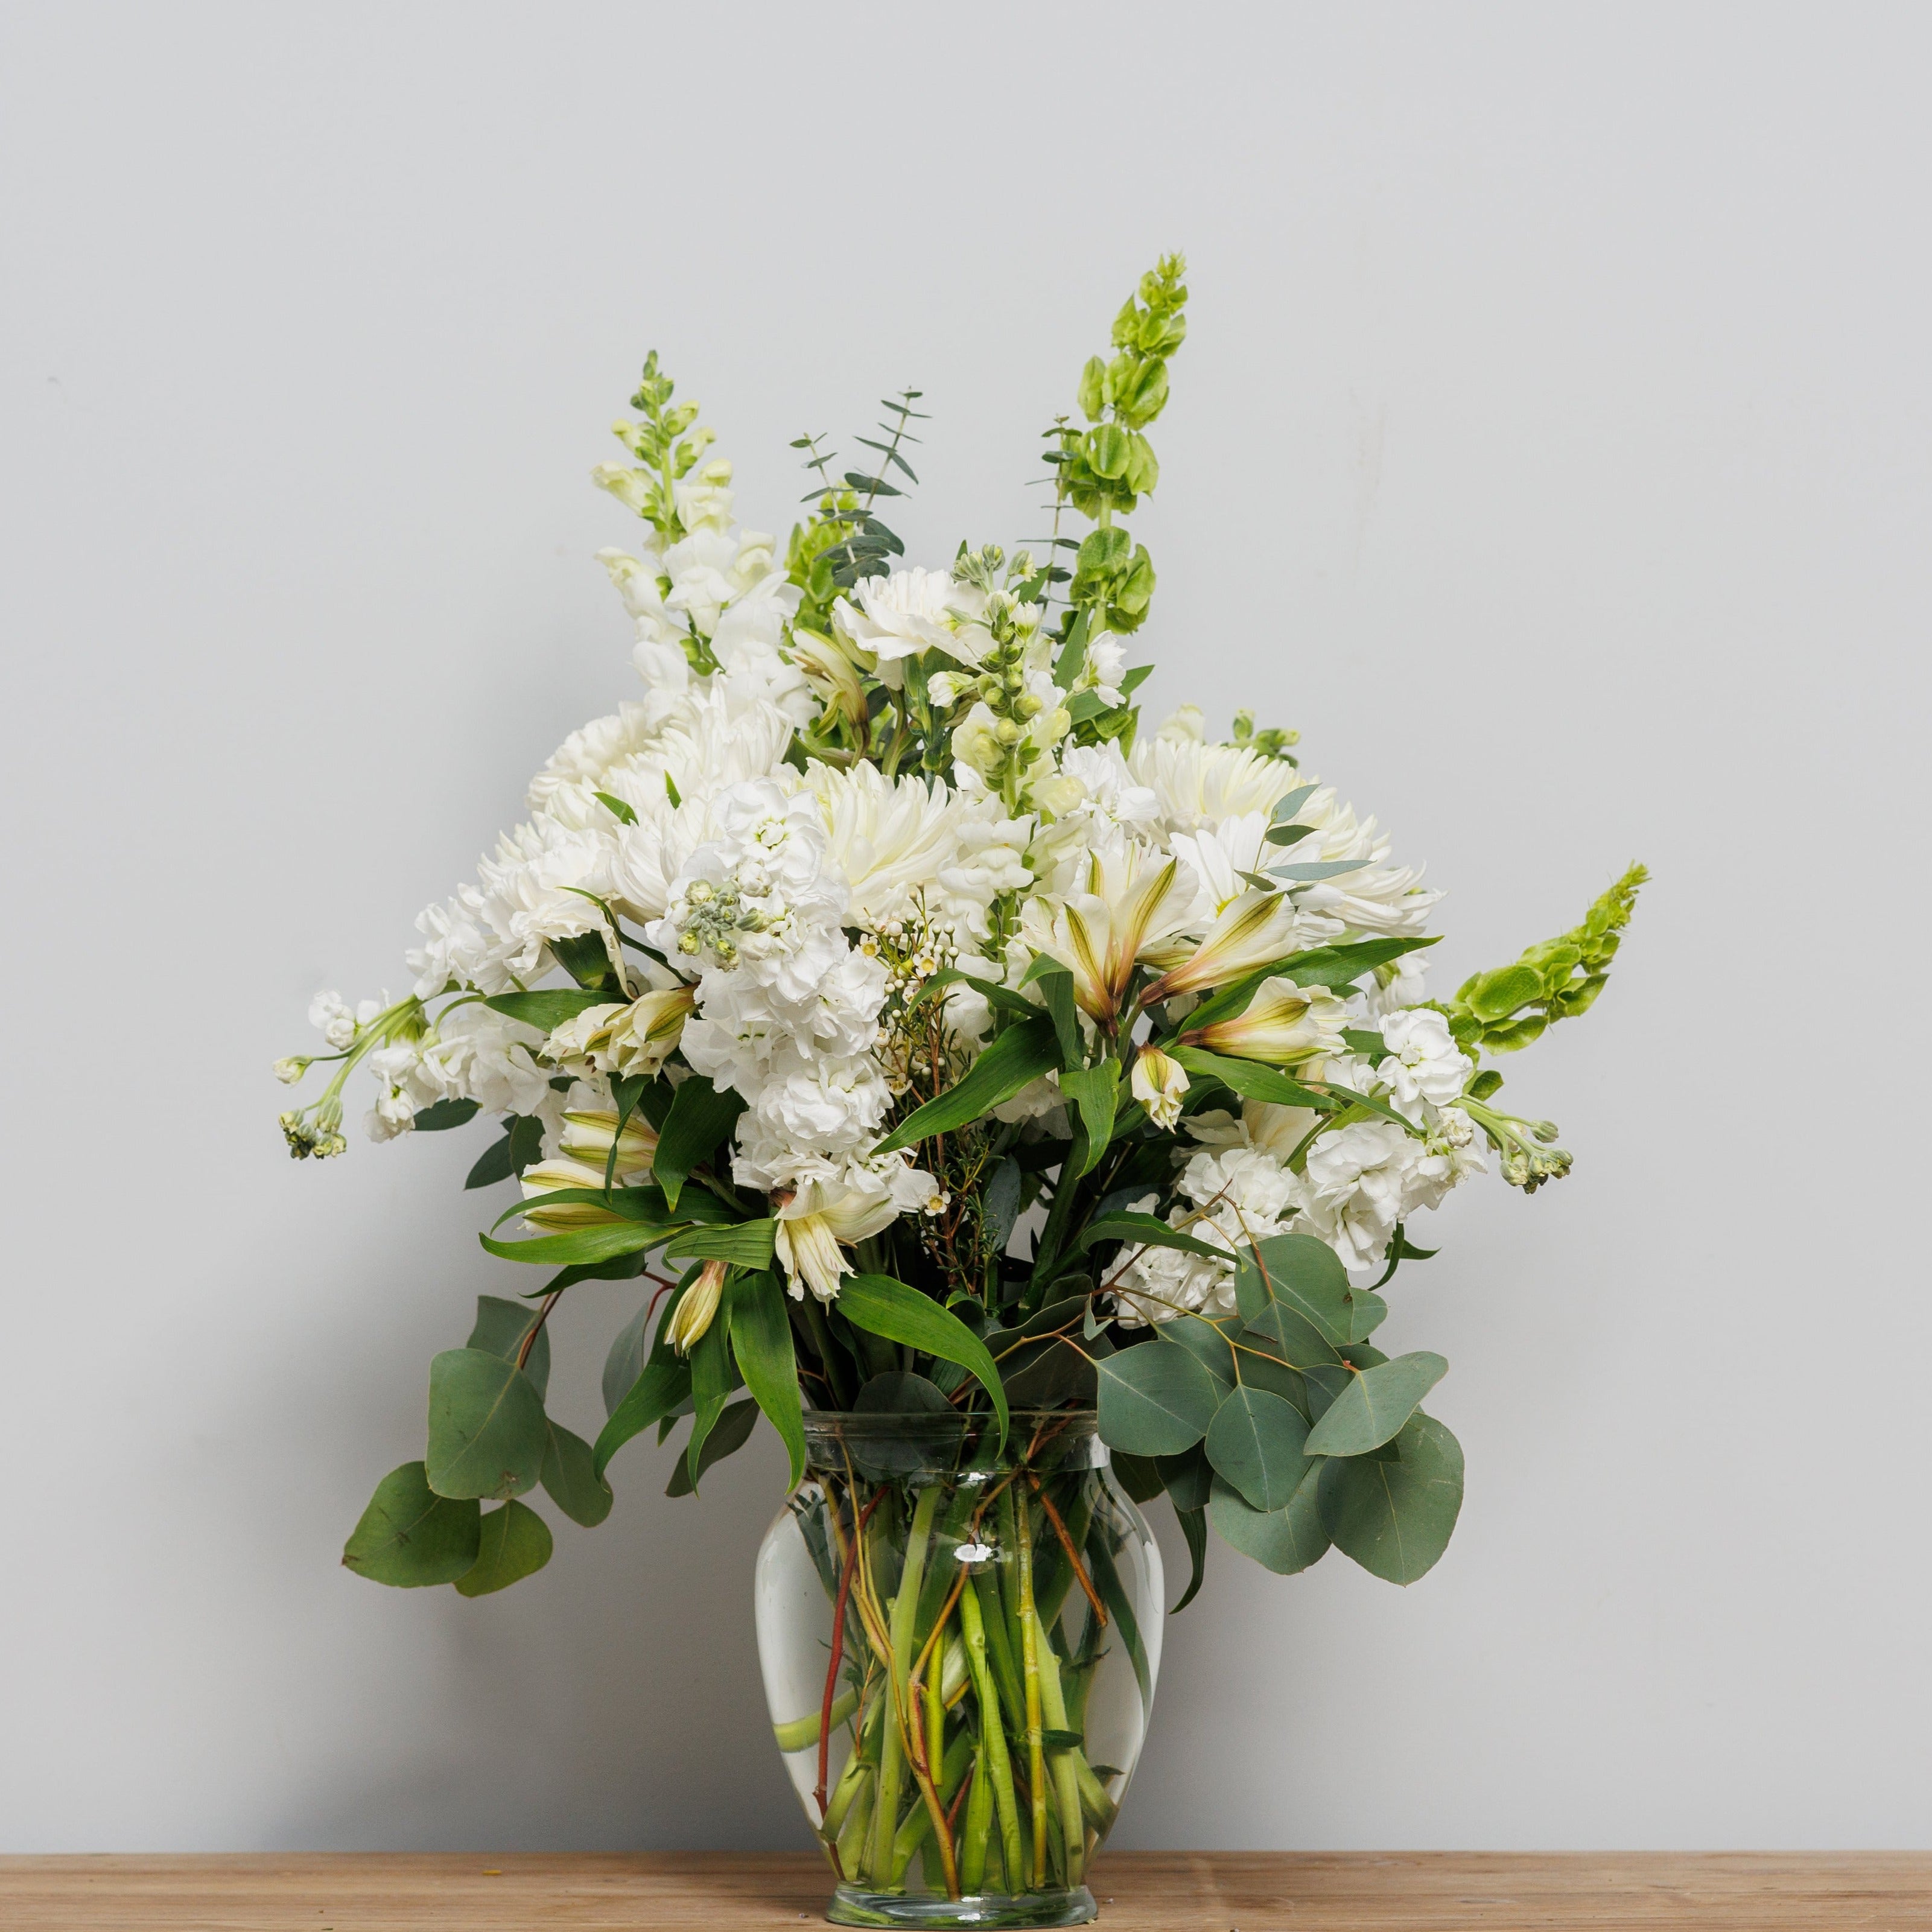 A white and green arrangement with mums and bells of Ireland.